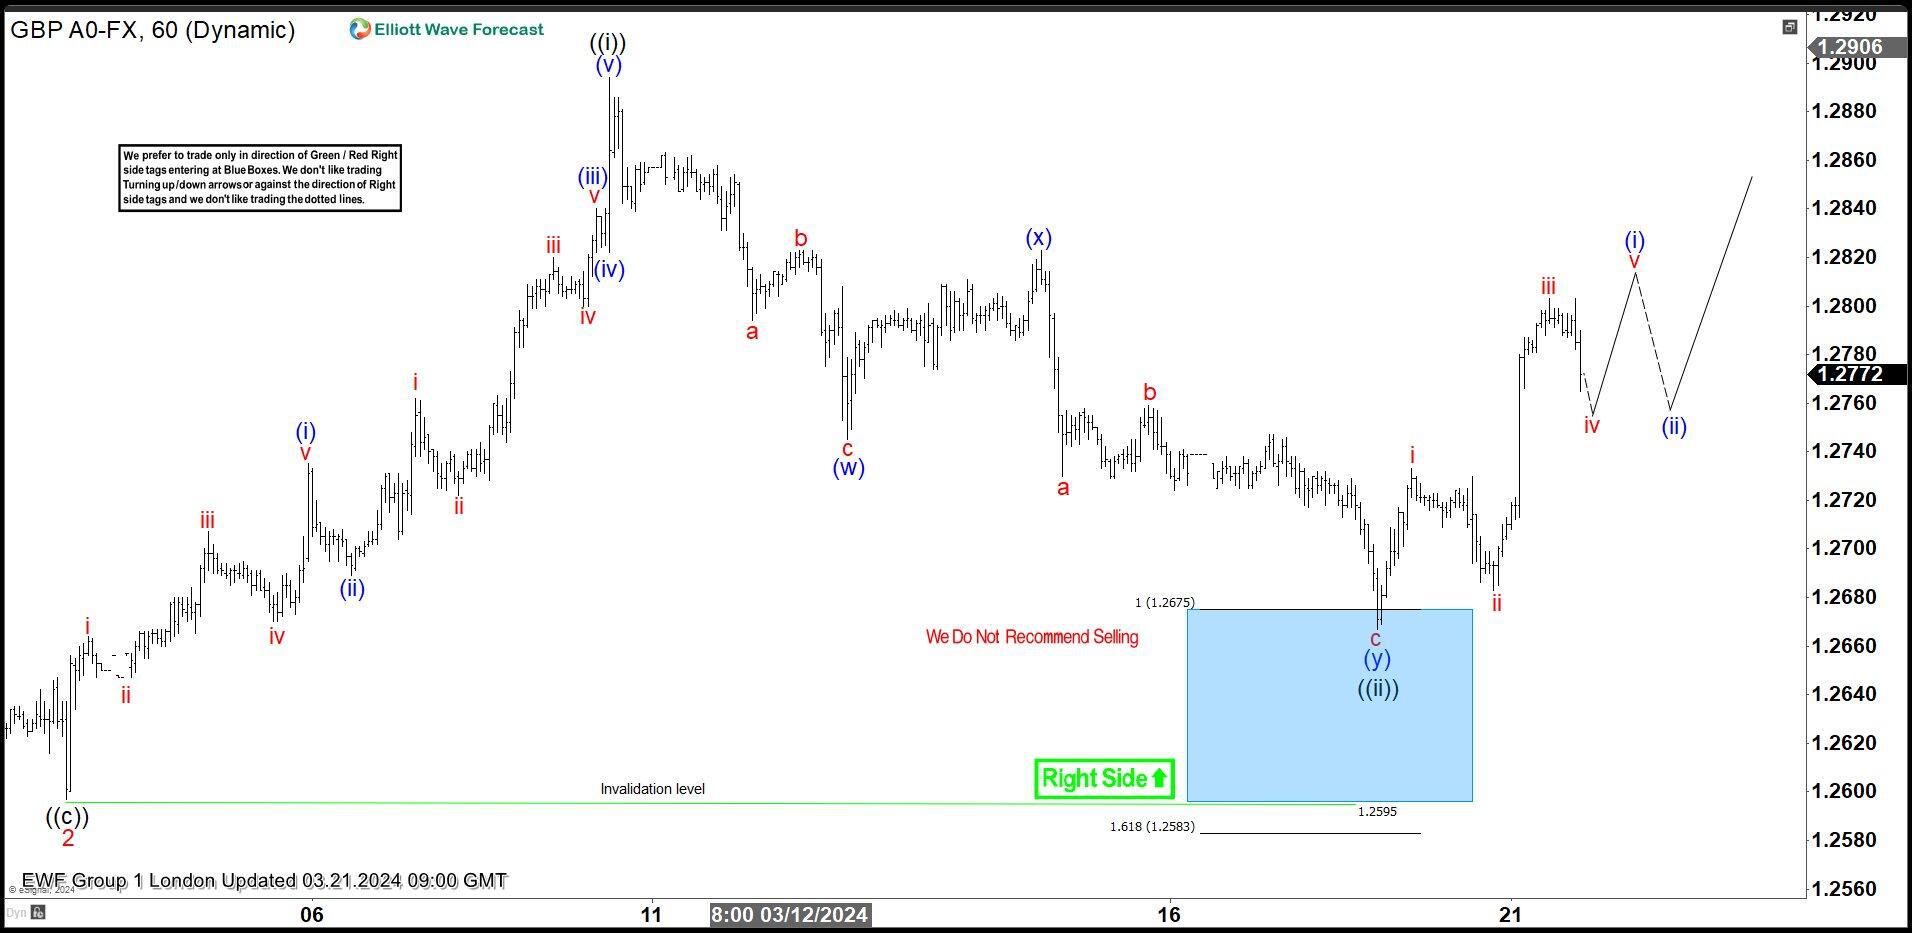 GBP/USD Elliott Wave: Buying the dips at the blue box area